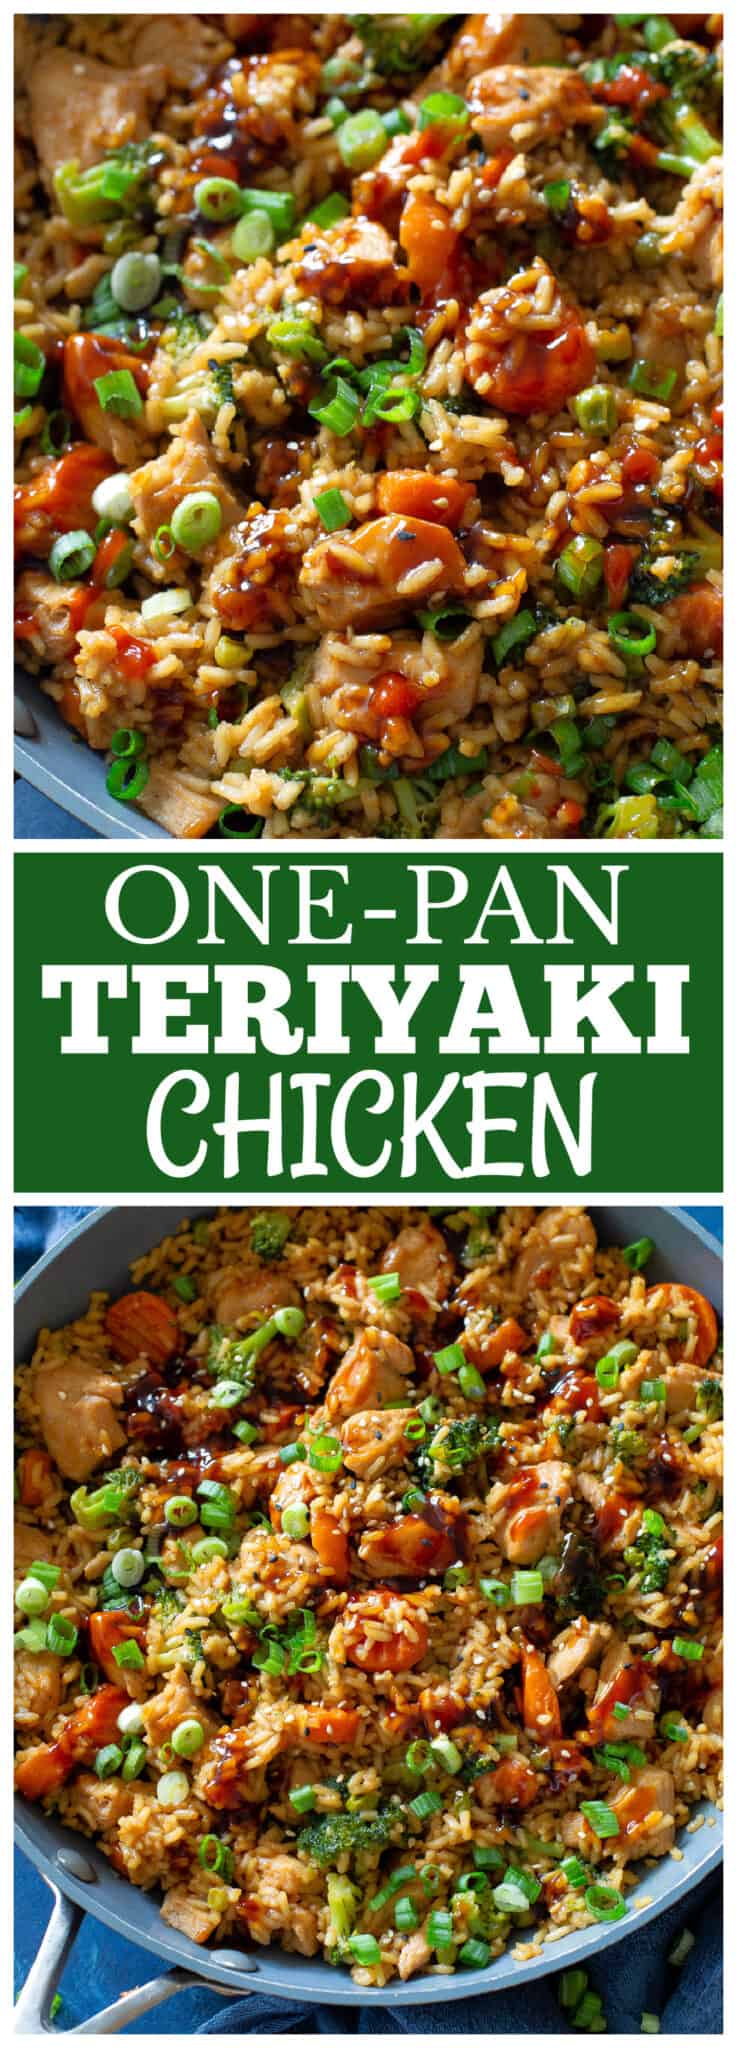 One-Pan Teriyaki Chicken and Rice (+VIDEO) - The Girl Who Ate Everything